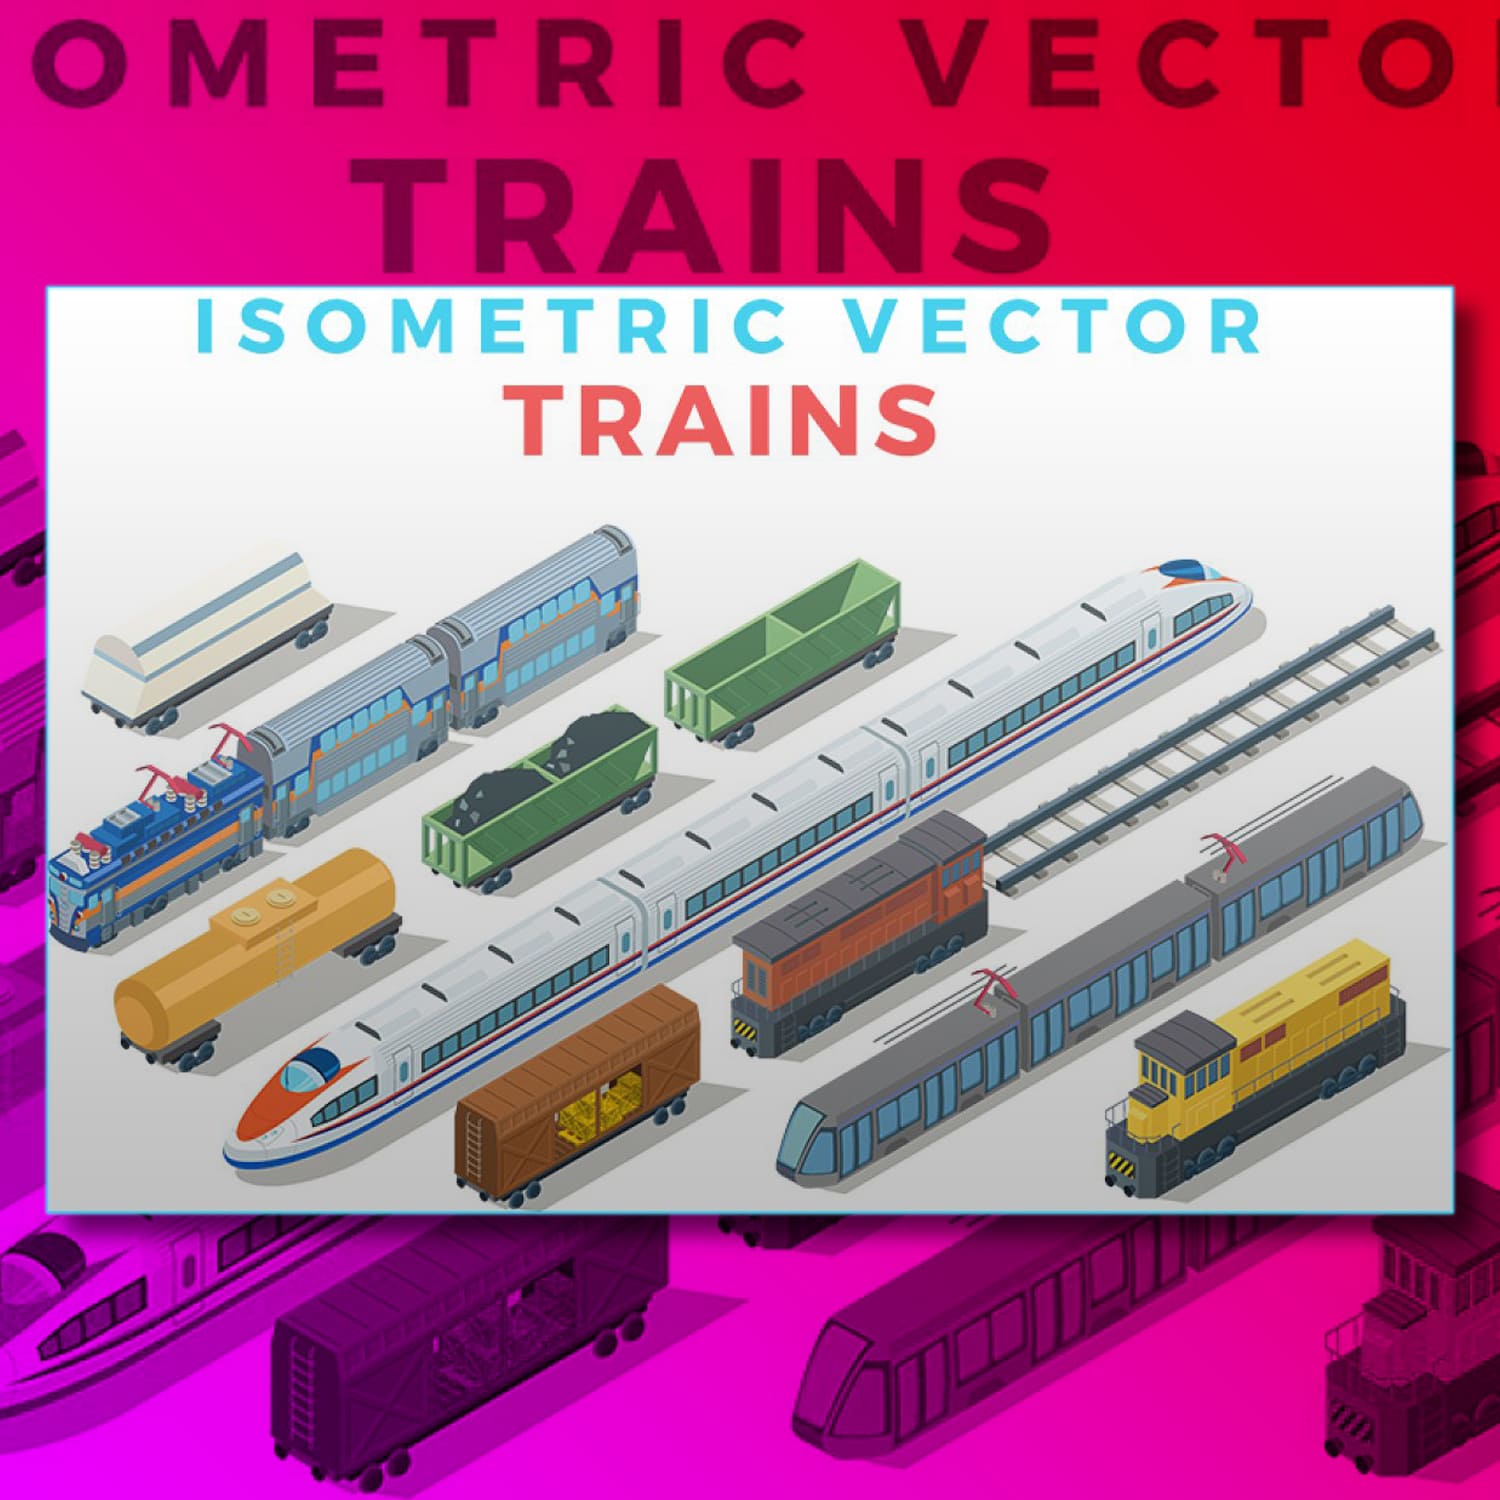 Vector Trains Isometric Flat style, main picture 1500x1500.